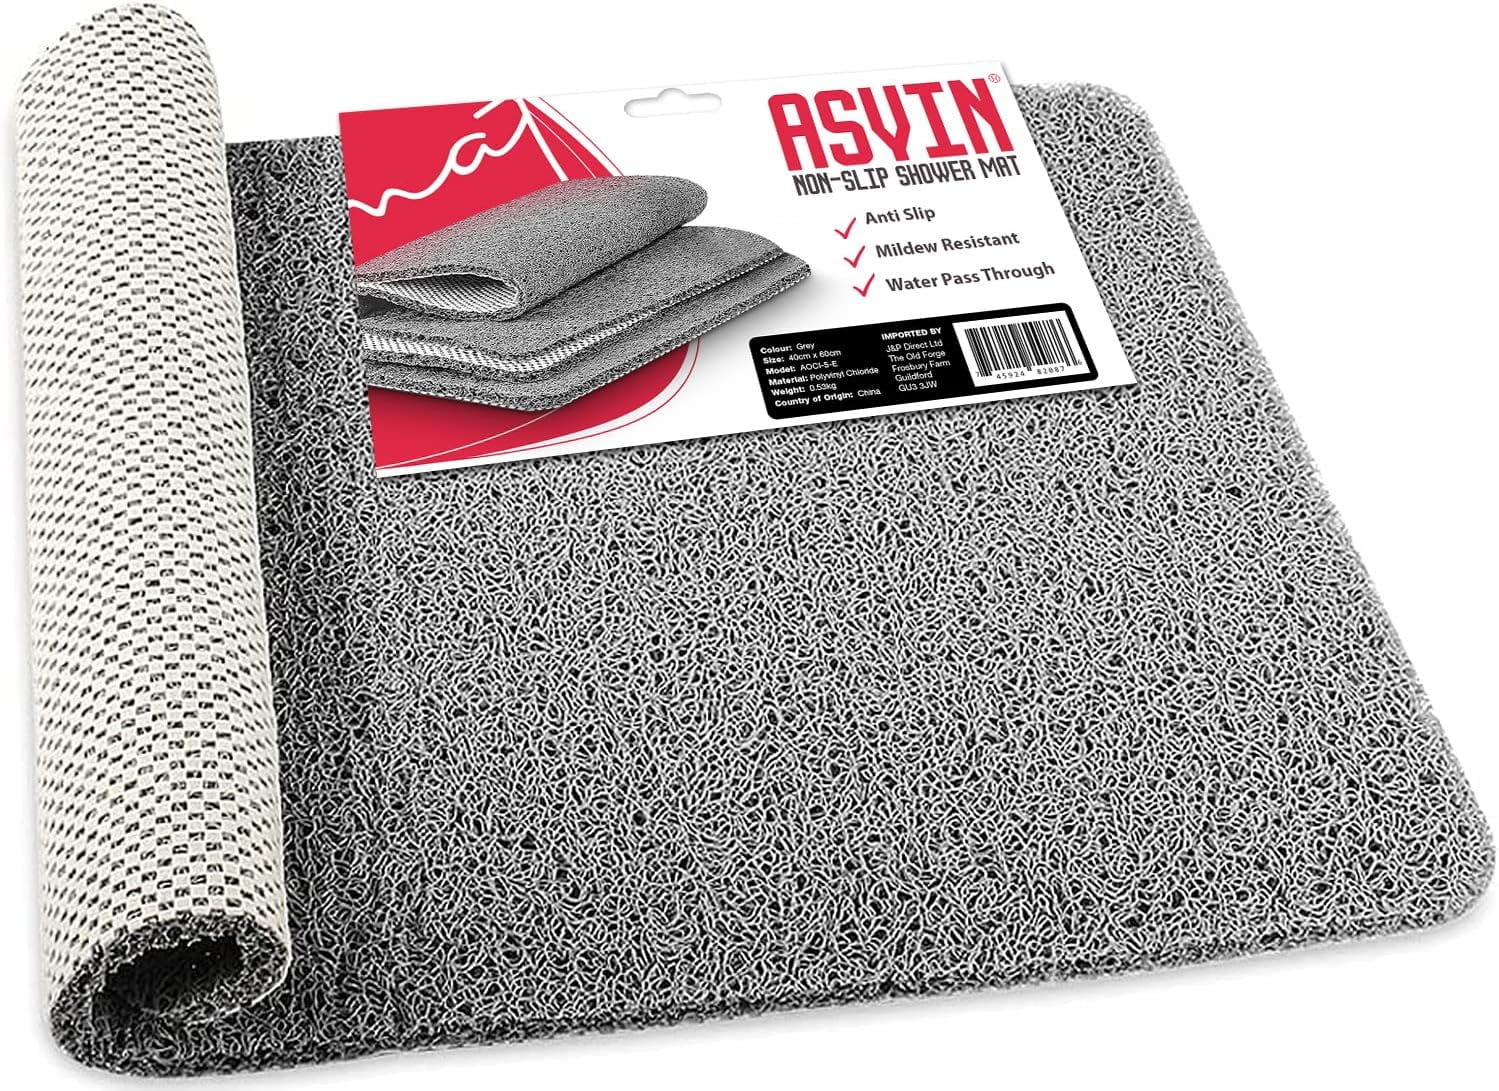 AMOFY Pet Mats, 43X26, Exceptionally Hygienic, Non-Slip, Water Resistant,  Comfortable and Portable, Machine Washable, Fit Indoor Outdoor Use for